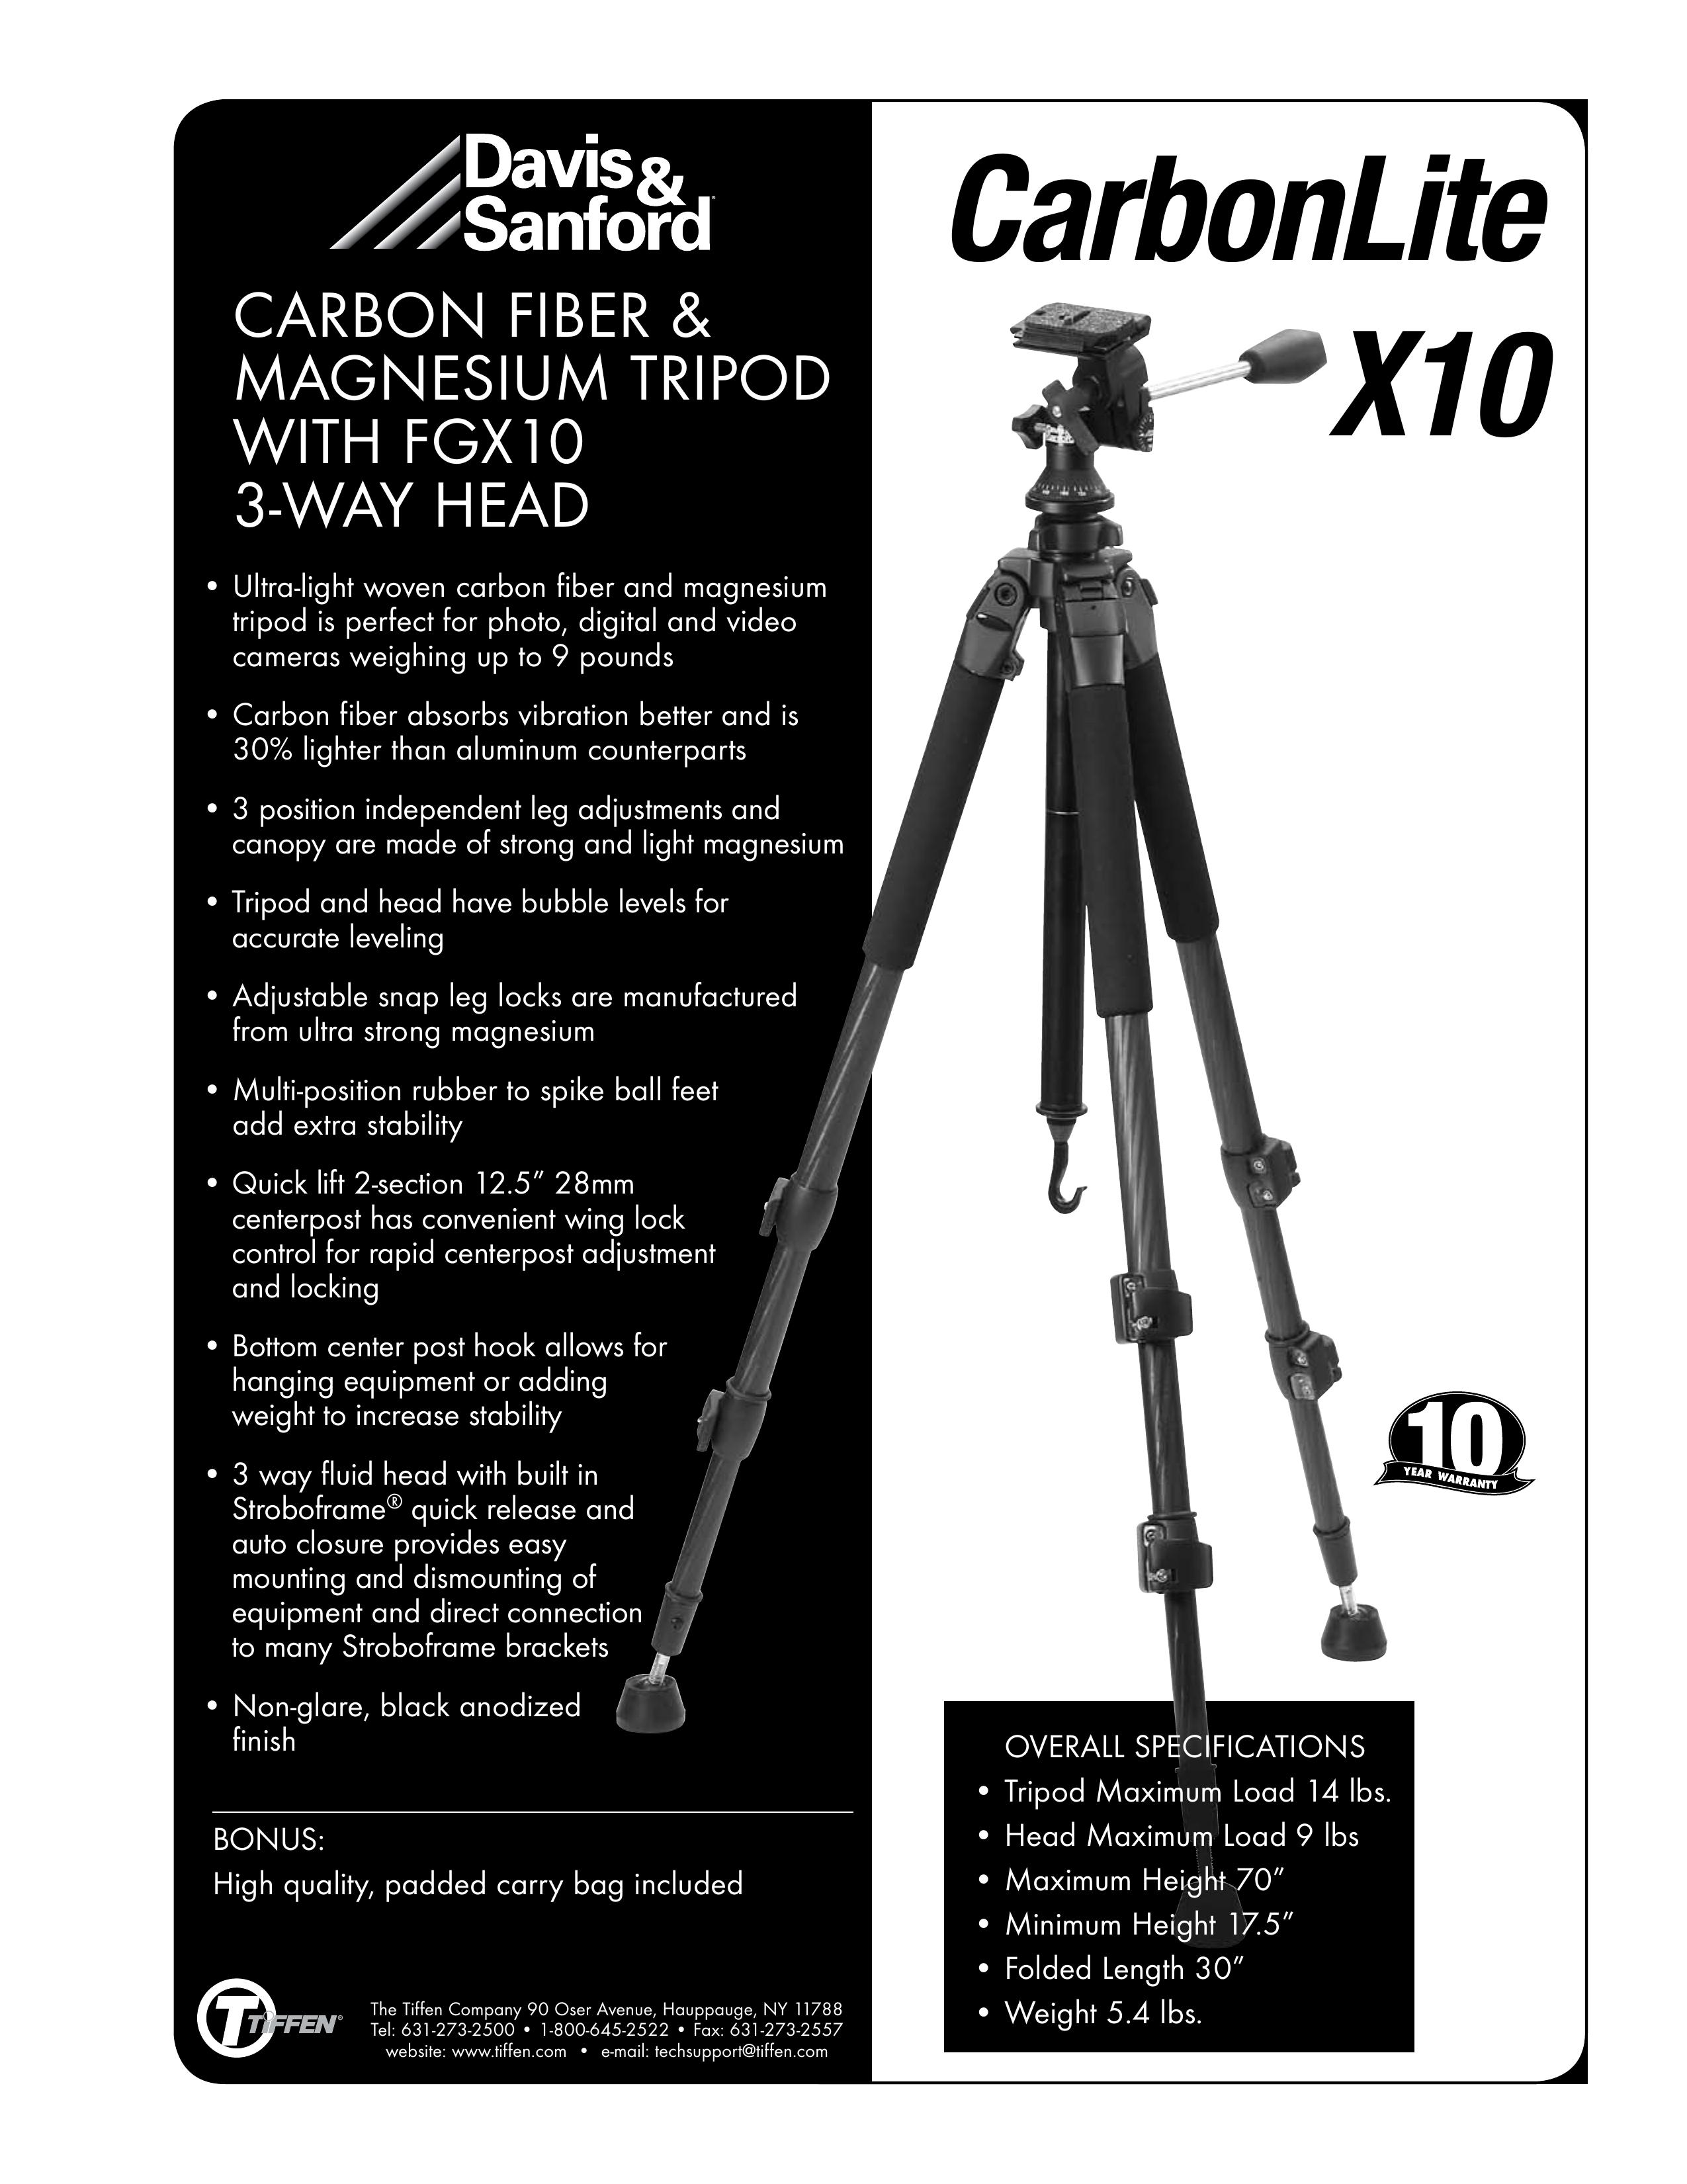 Tiffen FGX10 Camcorder Accessories User Manual